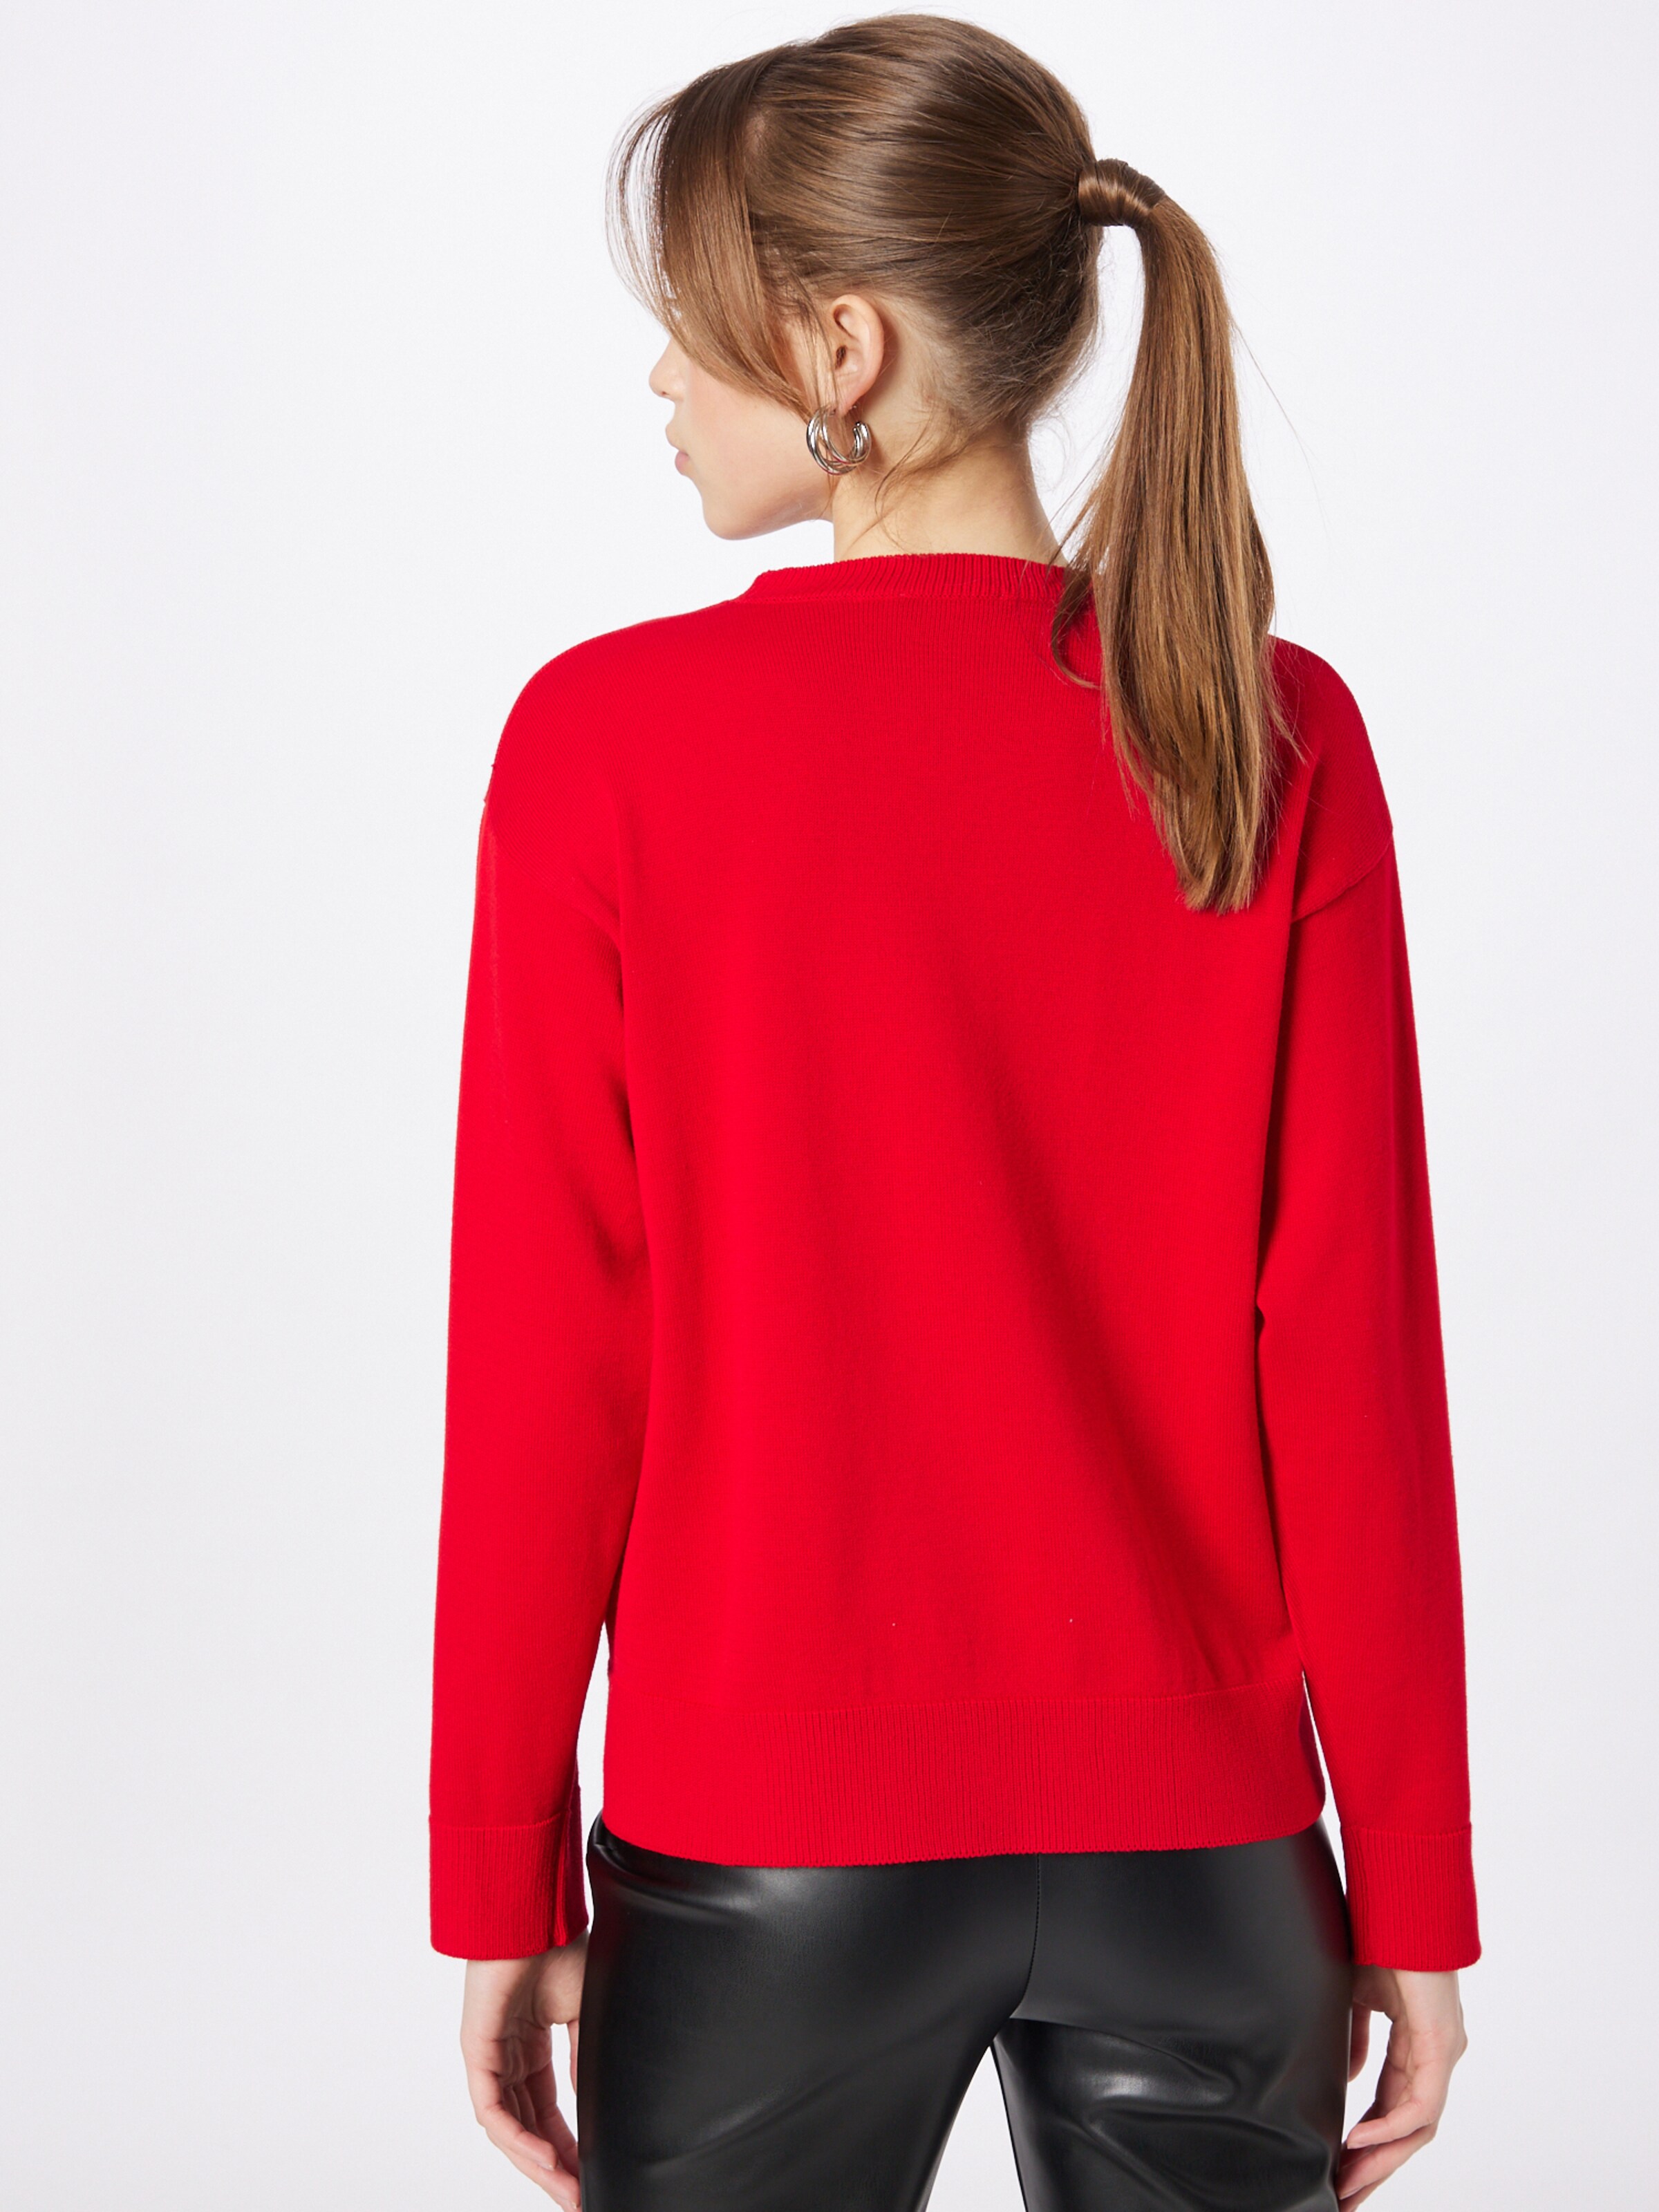 Frauen Pullover & Strick UNITED COLORS OF BENETTON Pullover in Rot - RU77977